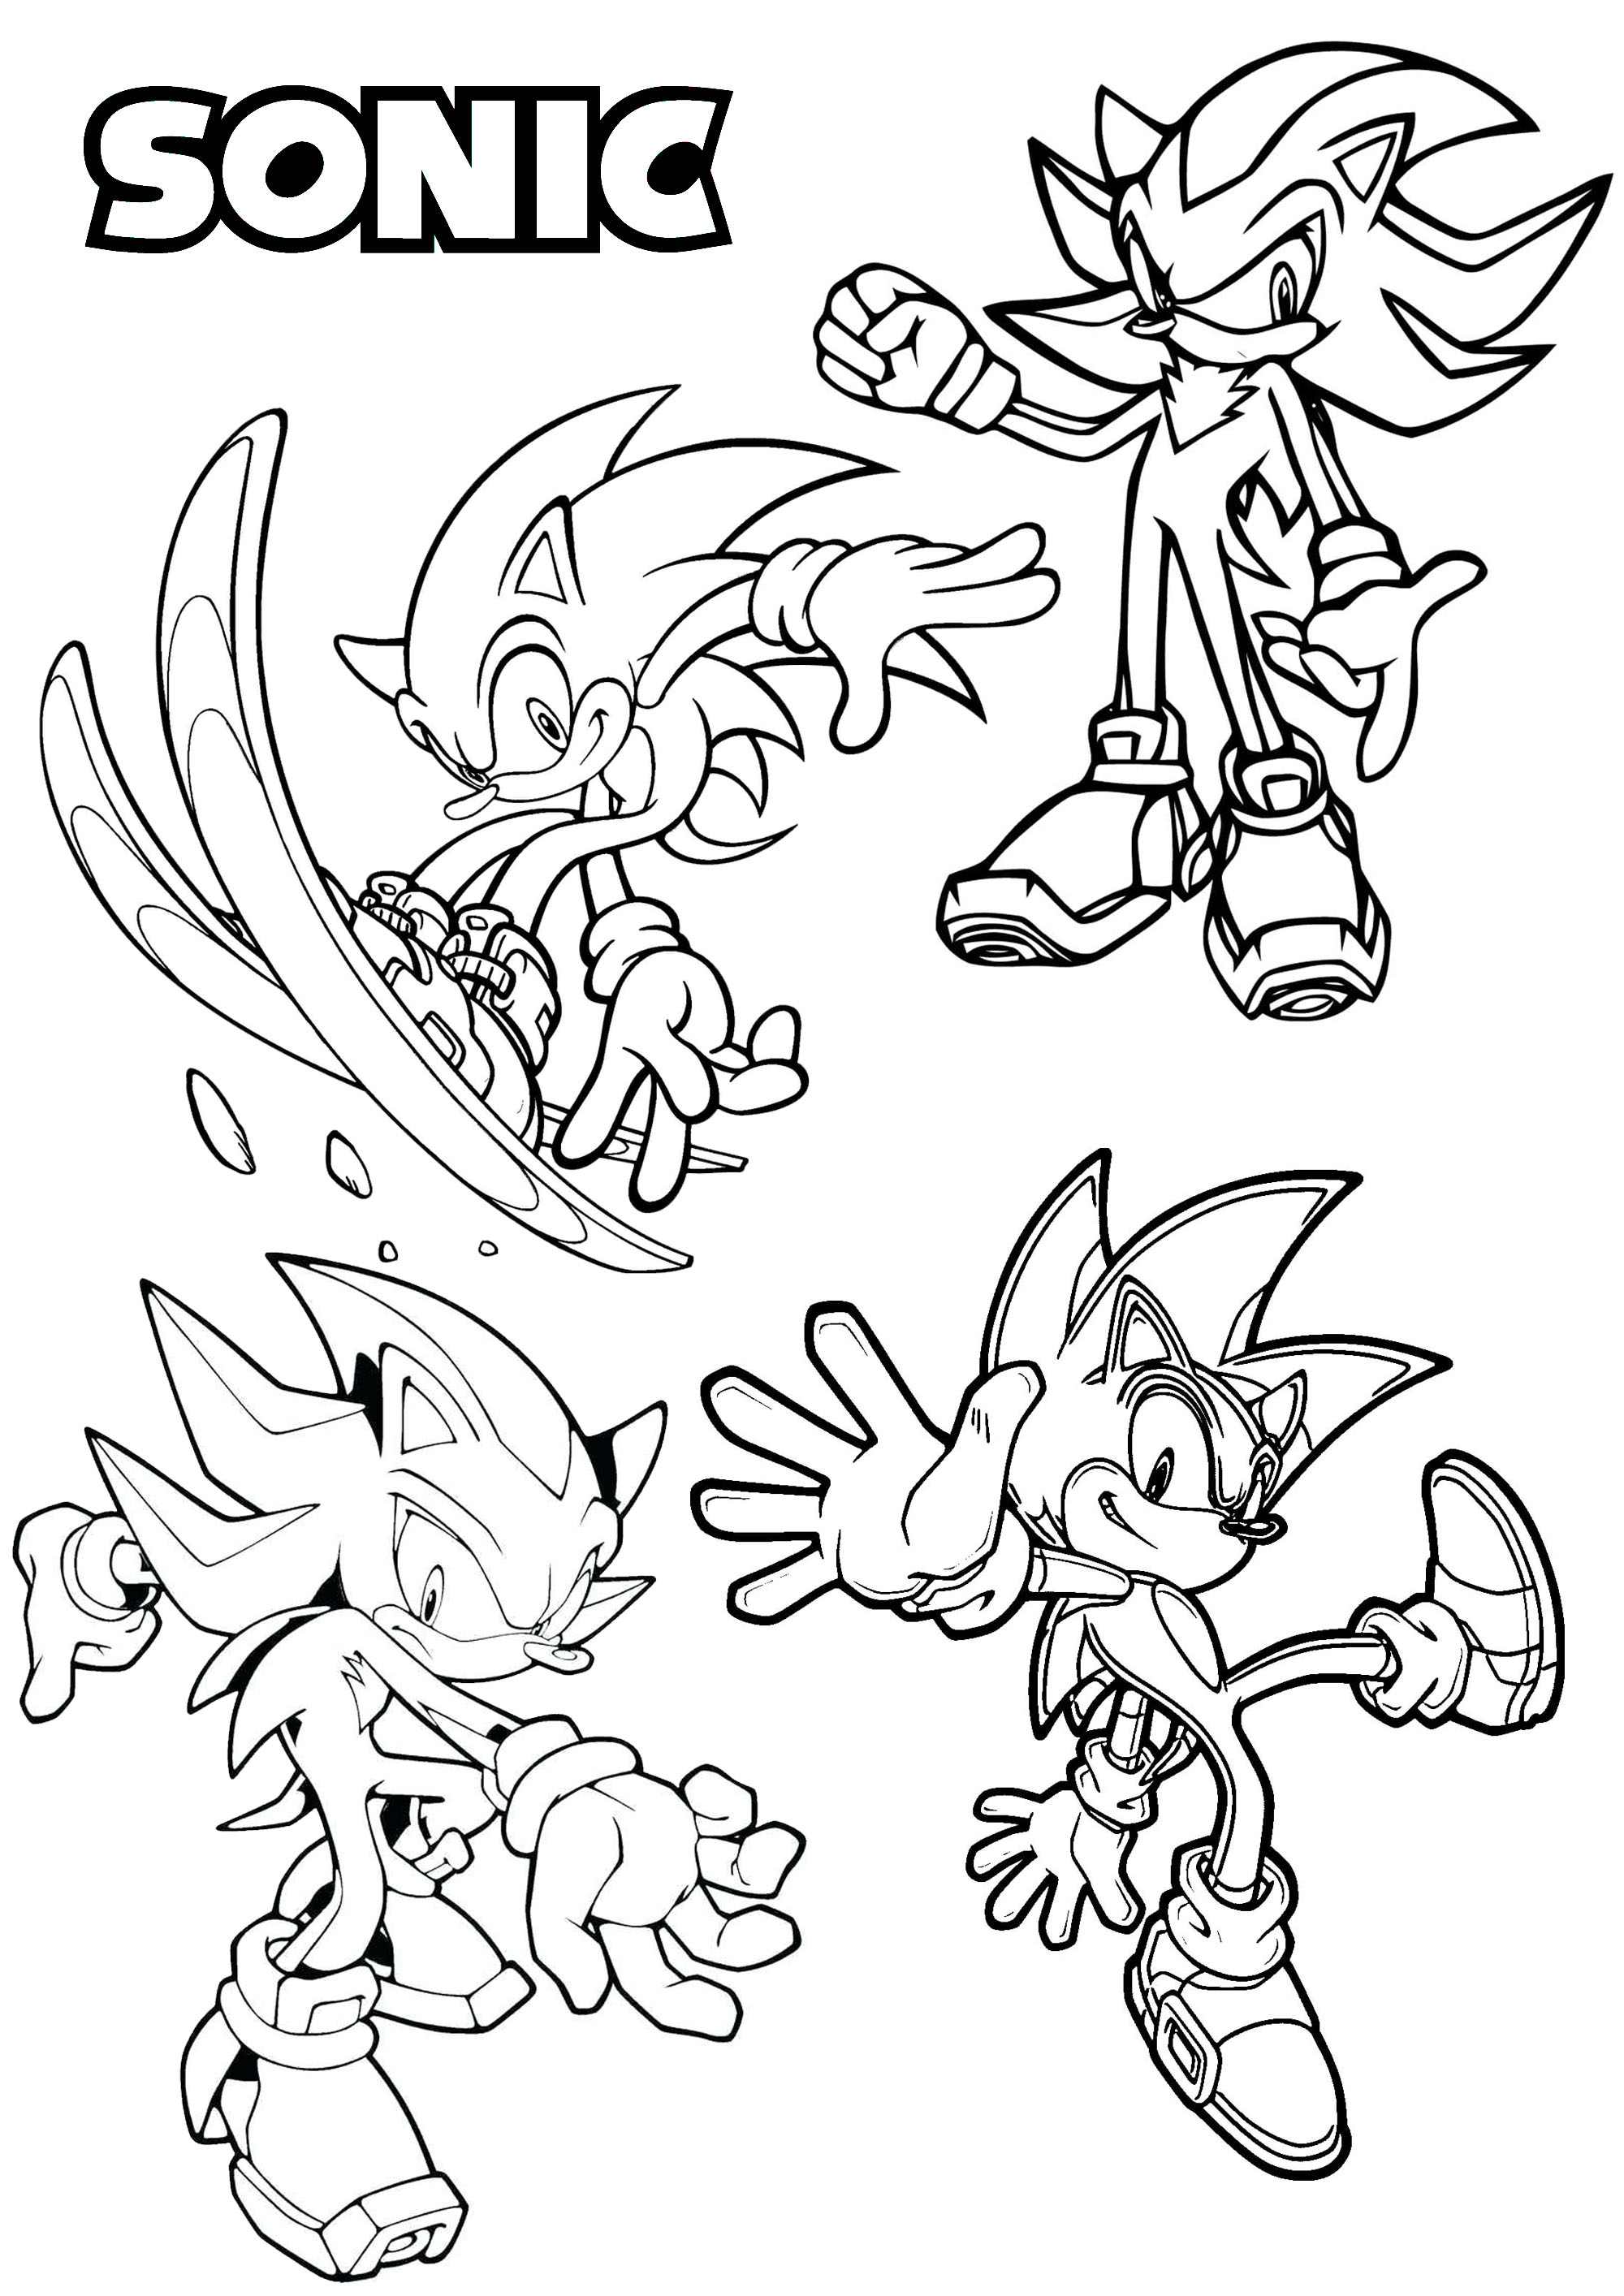 Download Sonic the Hedgehog - Return to childhood Adult Coloring Pages